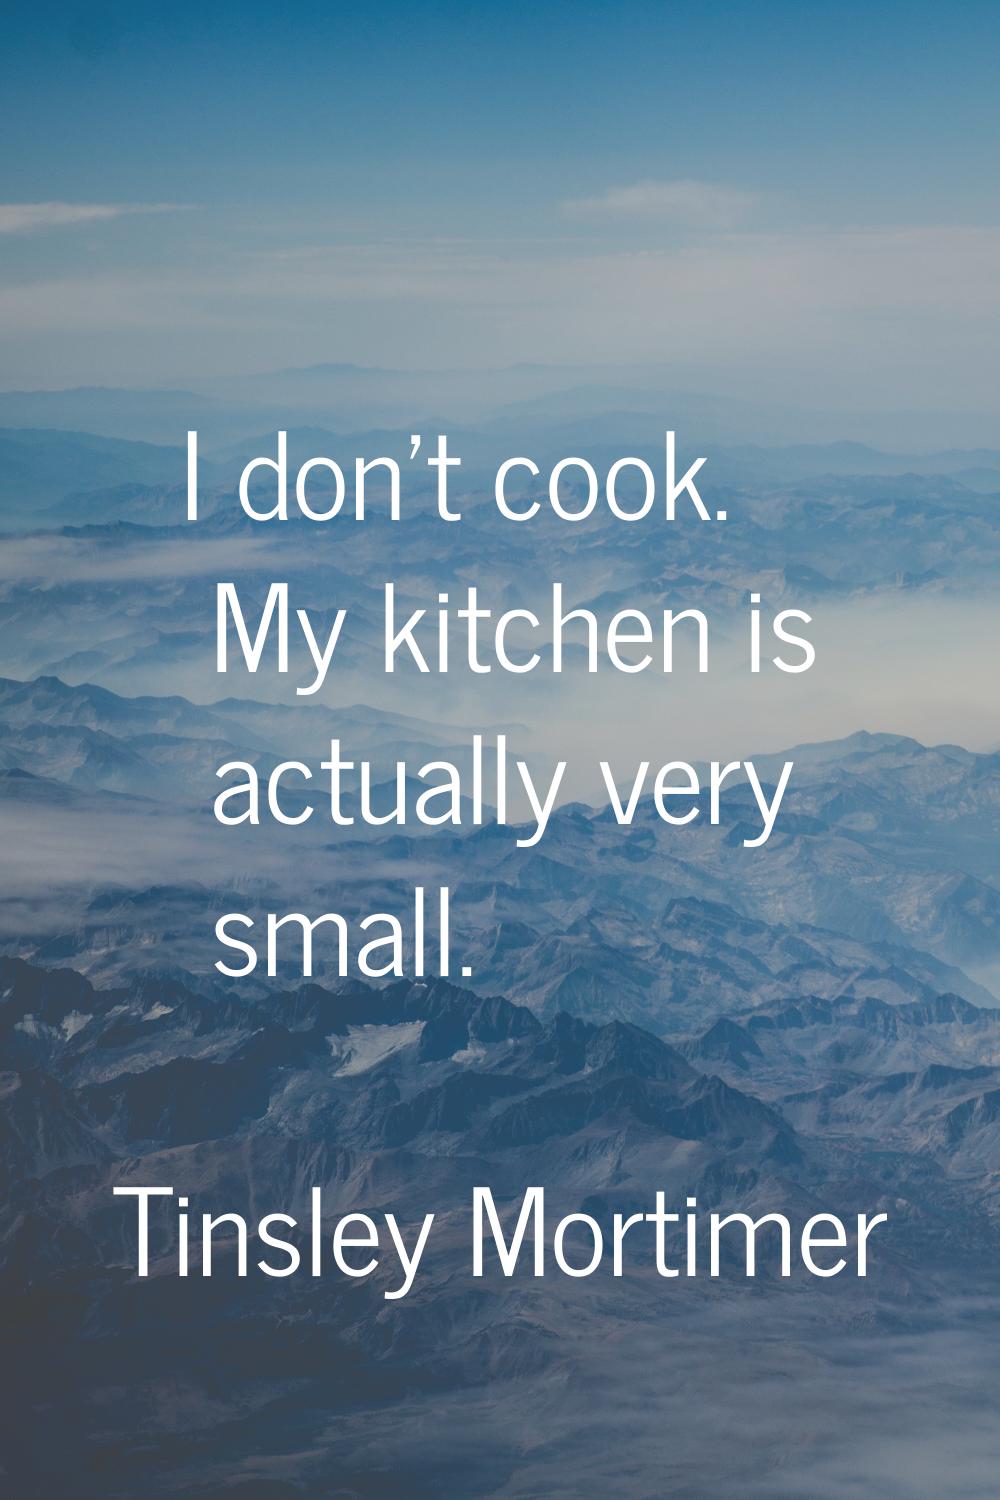 I don't cook. My kitchen is actually very small.